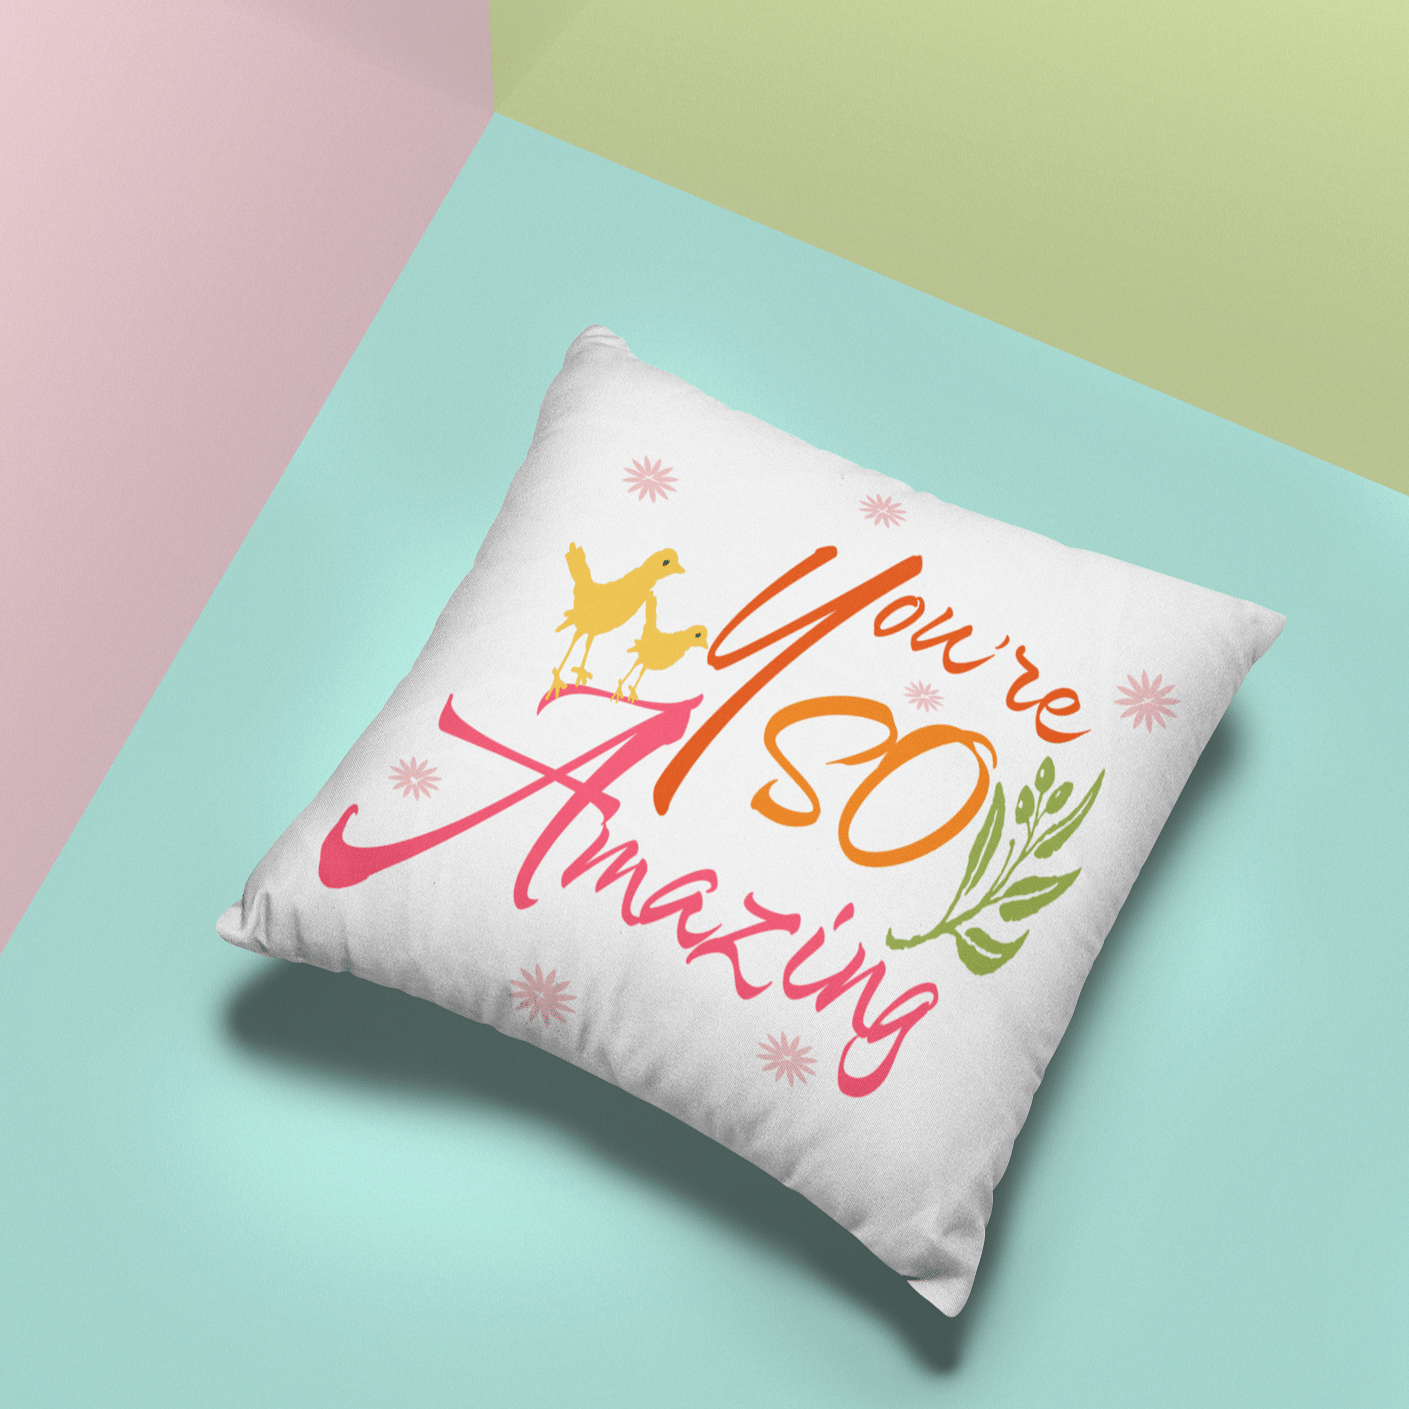 You're So Amazing Inspirational Quote Positive Mindset Lifestyle Premium Decorative Throw Pillow Cushion Pillows A Moment Of Now Women’s Boutique Clothing Online Lifestyle Store